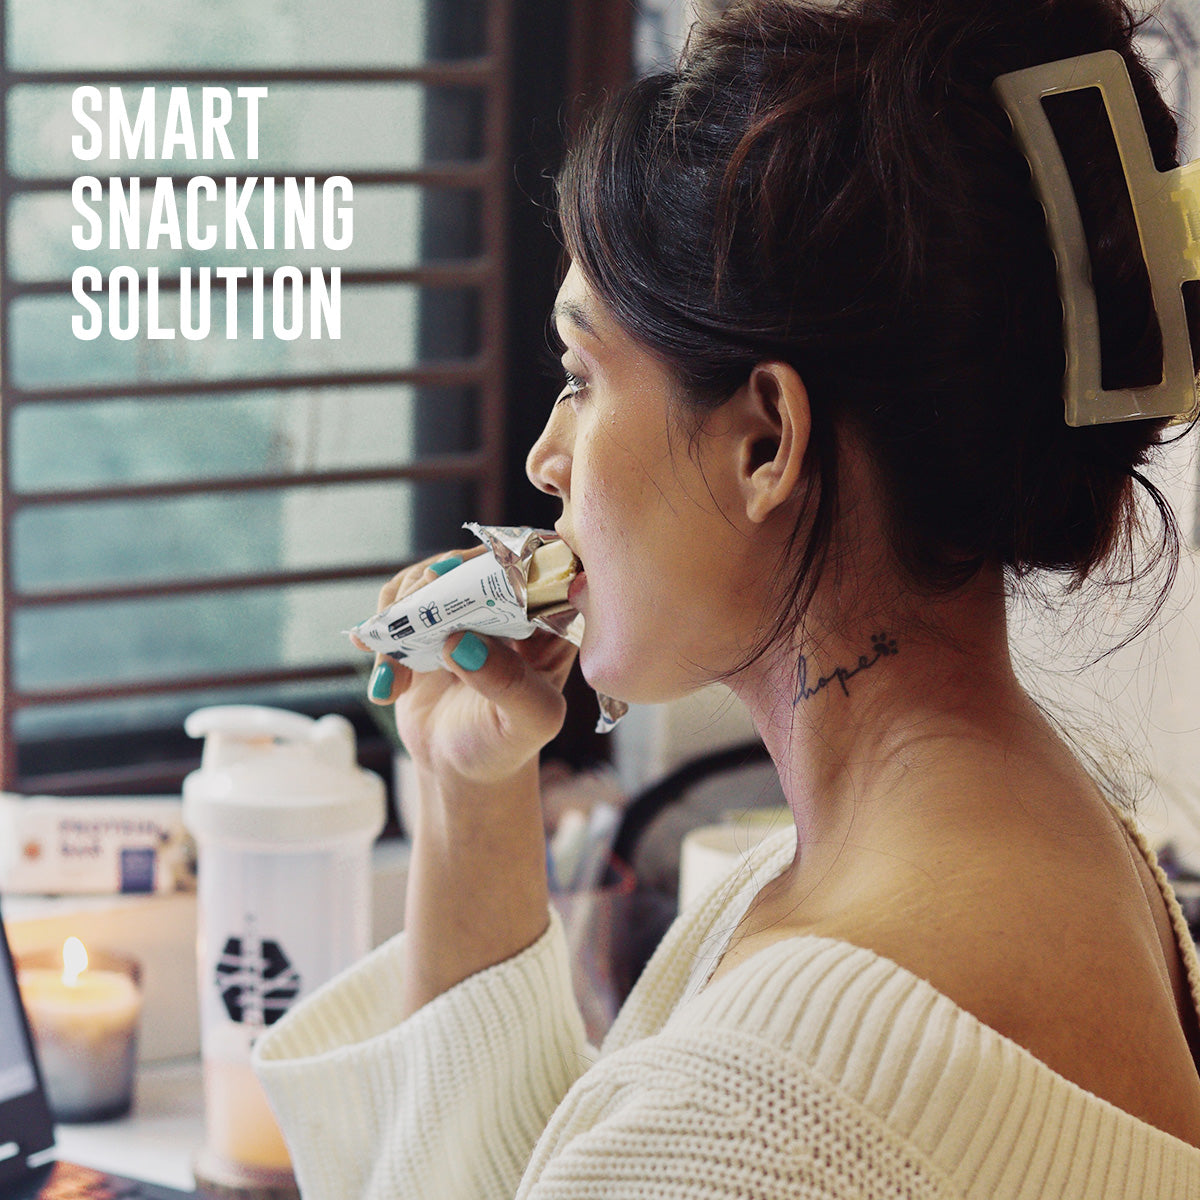 Your smart snacking solution